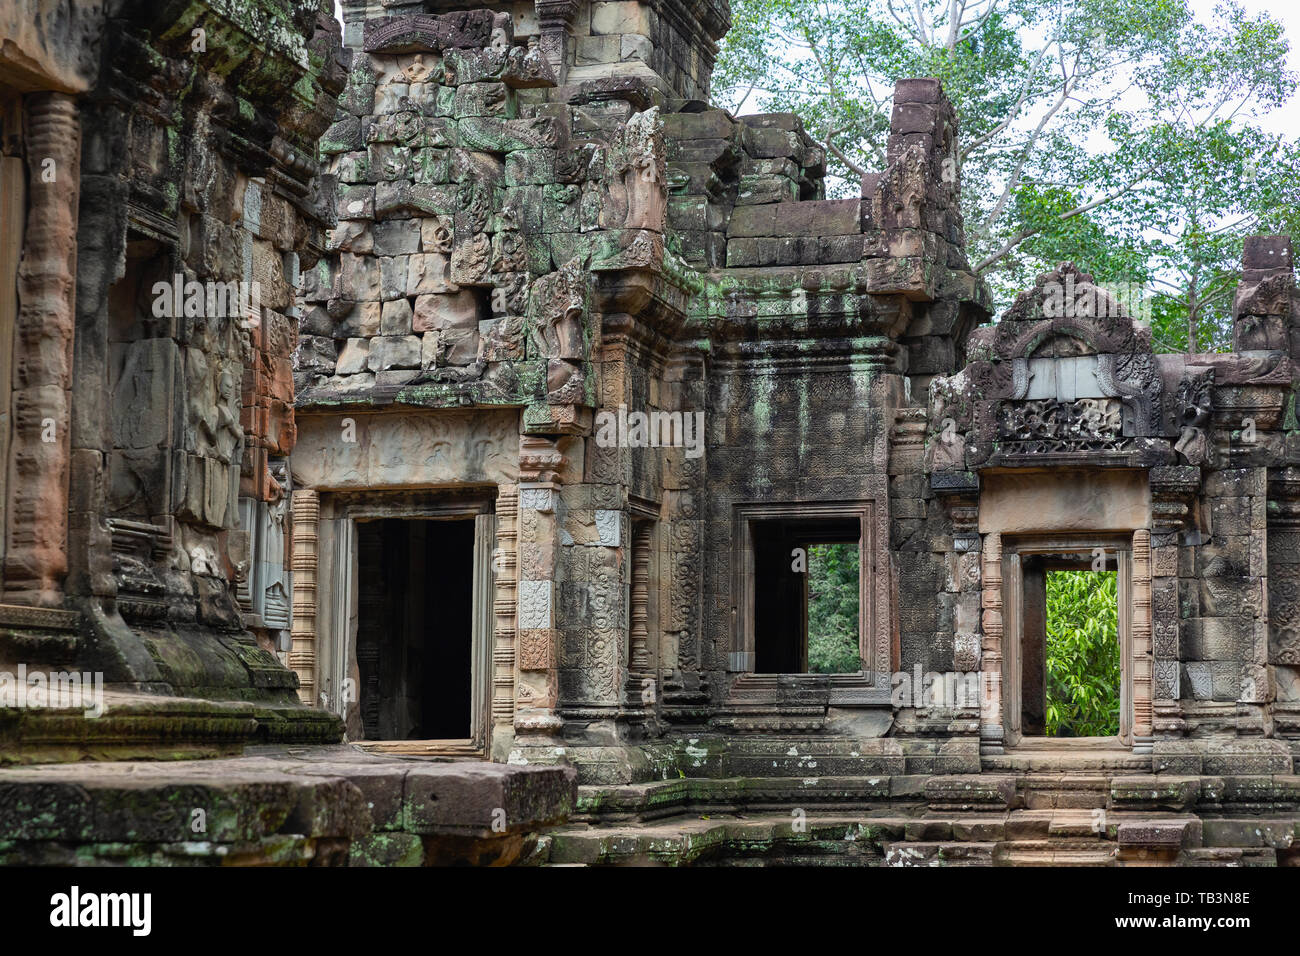 Banteay Kdei Temple, Angkor, UNESCO World Heritage Site, Siem Reap Province, Cambodia, Indochina, Southeast Asia, Asia Stock Photo